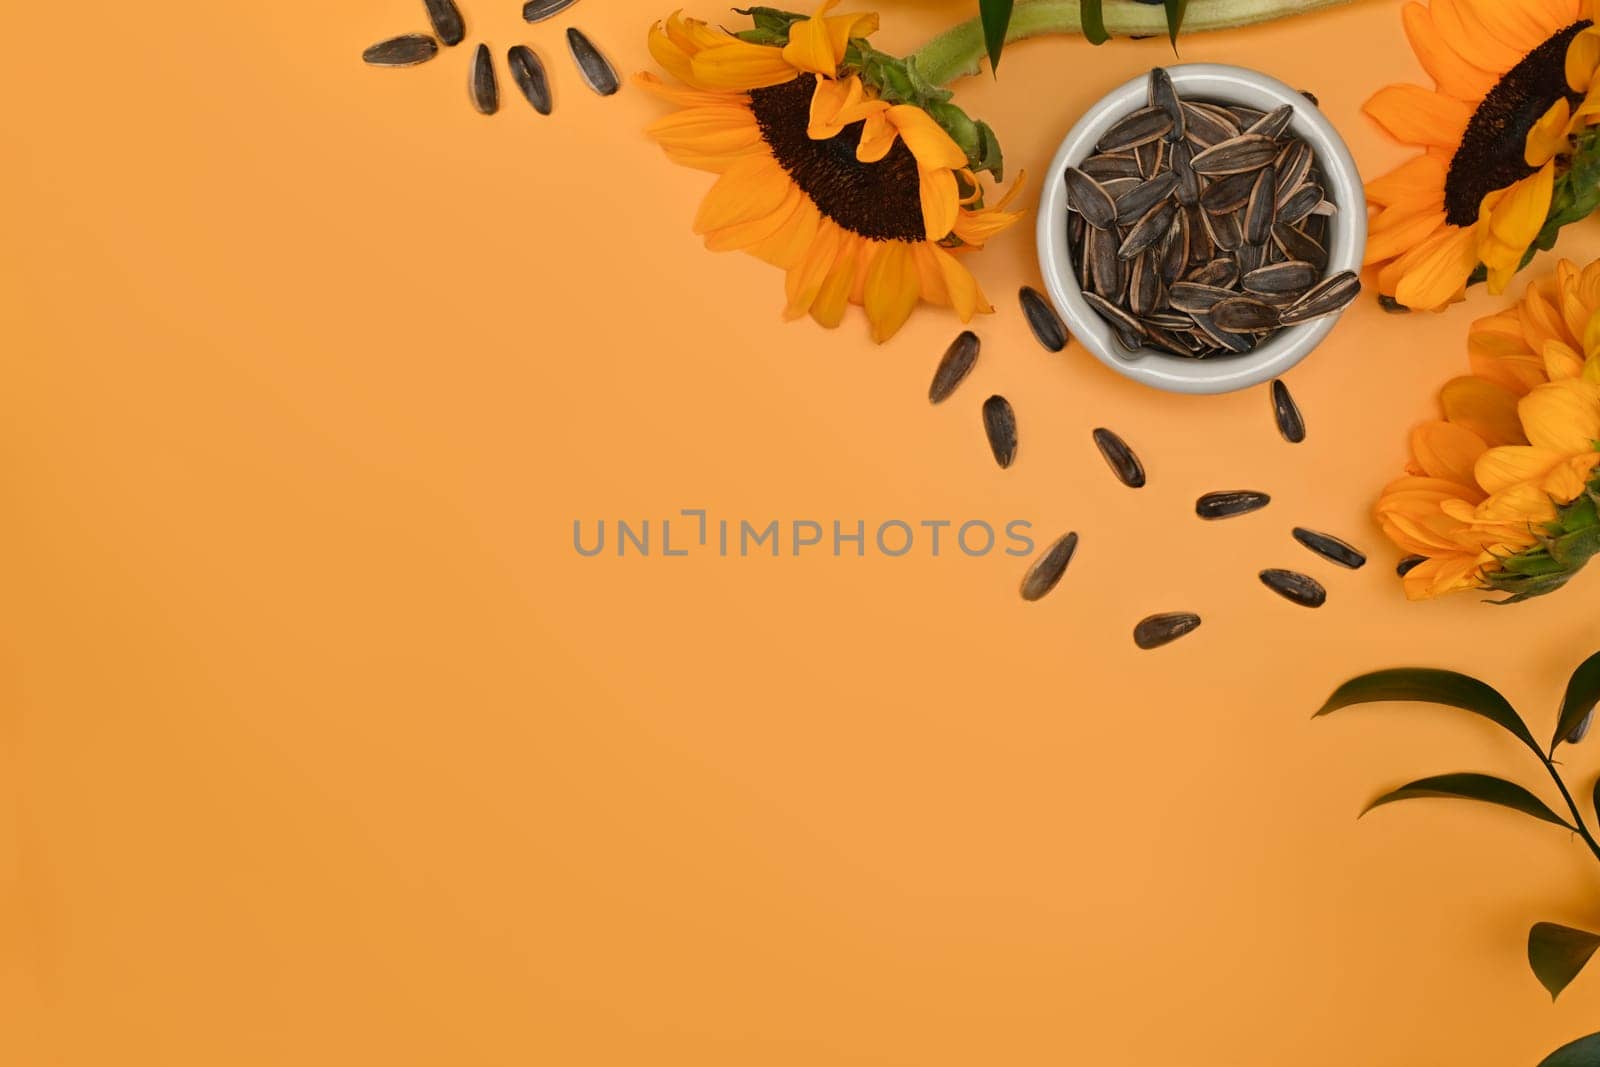 Sunflower seeds in blow on yellow background with space for your text. Organic product and vegan food concept by prathanchorruangsak